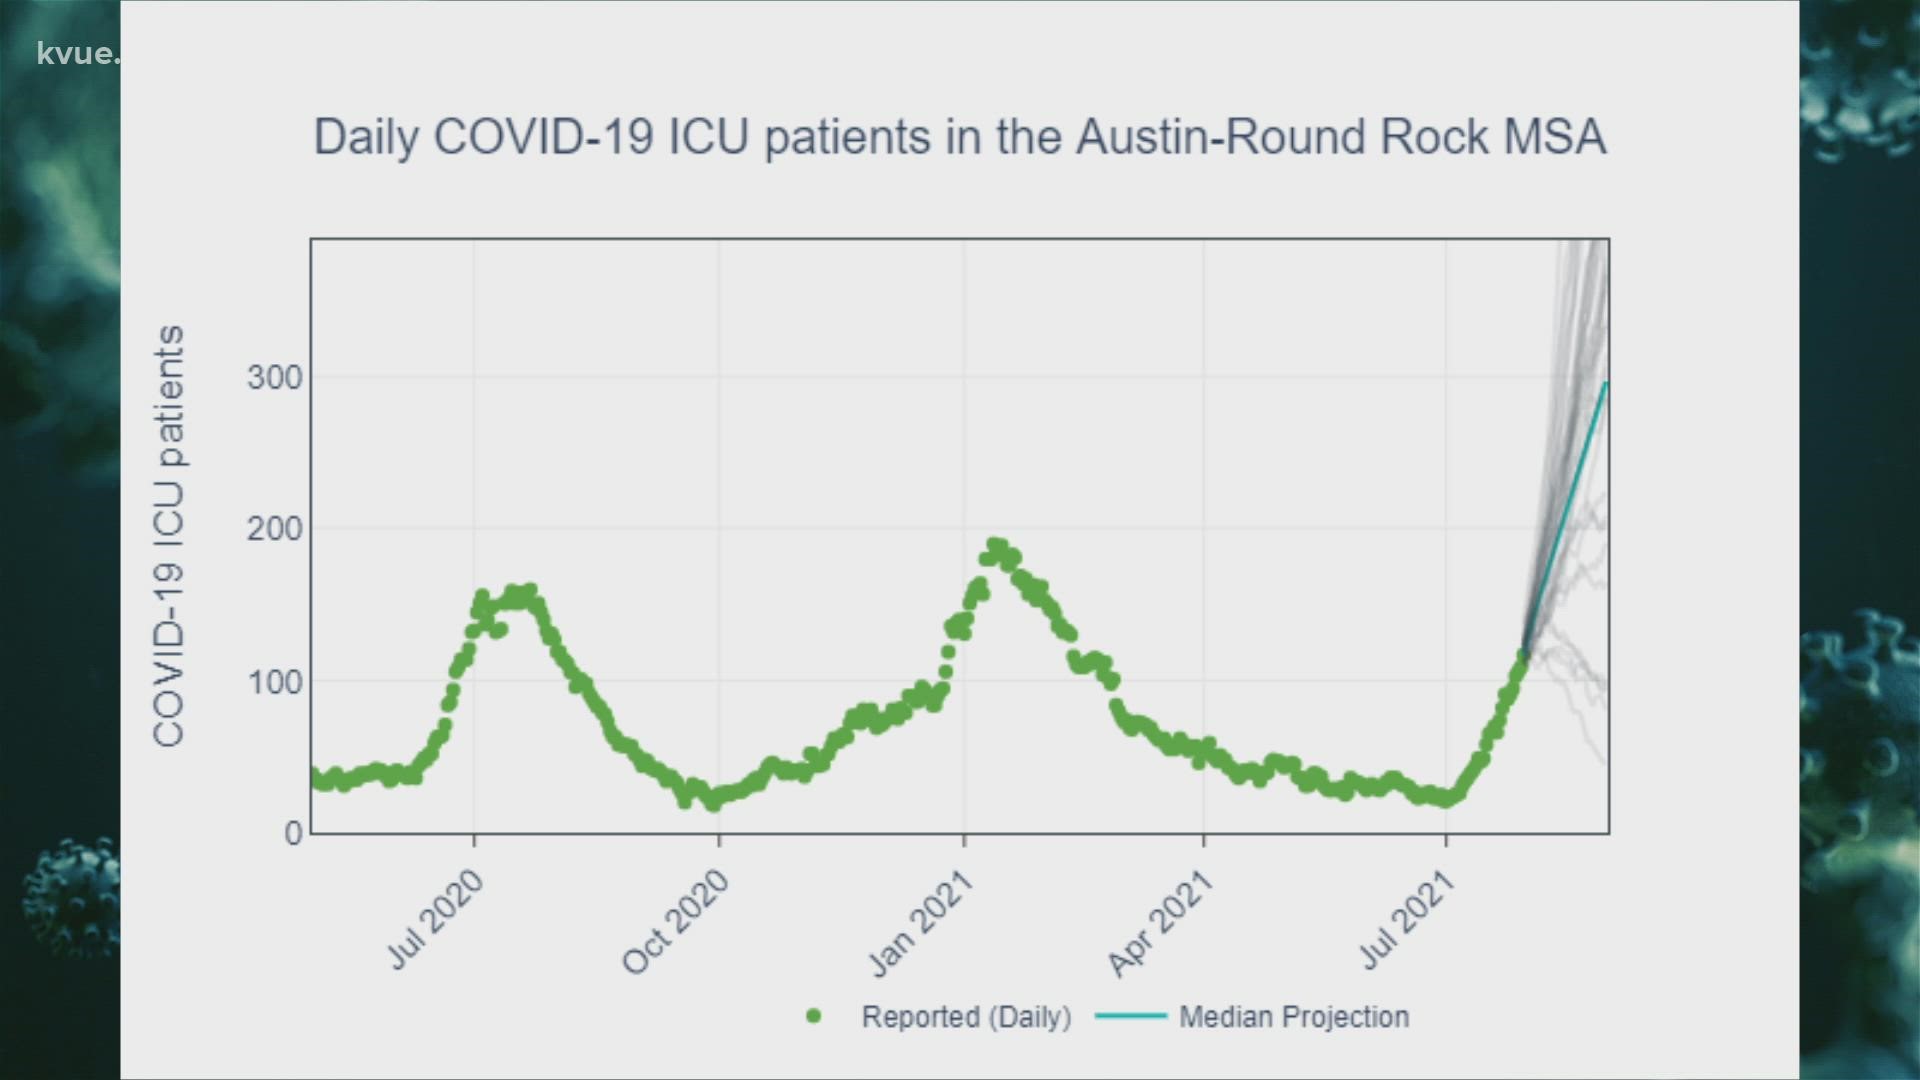 Current projections show nearly 300 patients will be in Austin-area ICUs by the end of the month, which would be the largest surge yet.